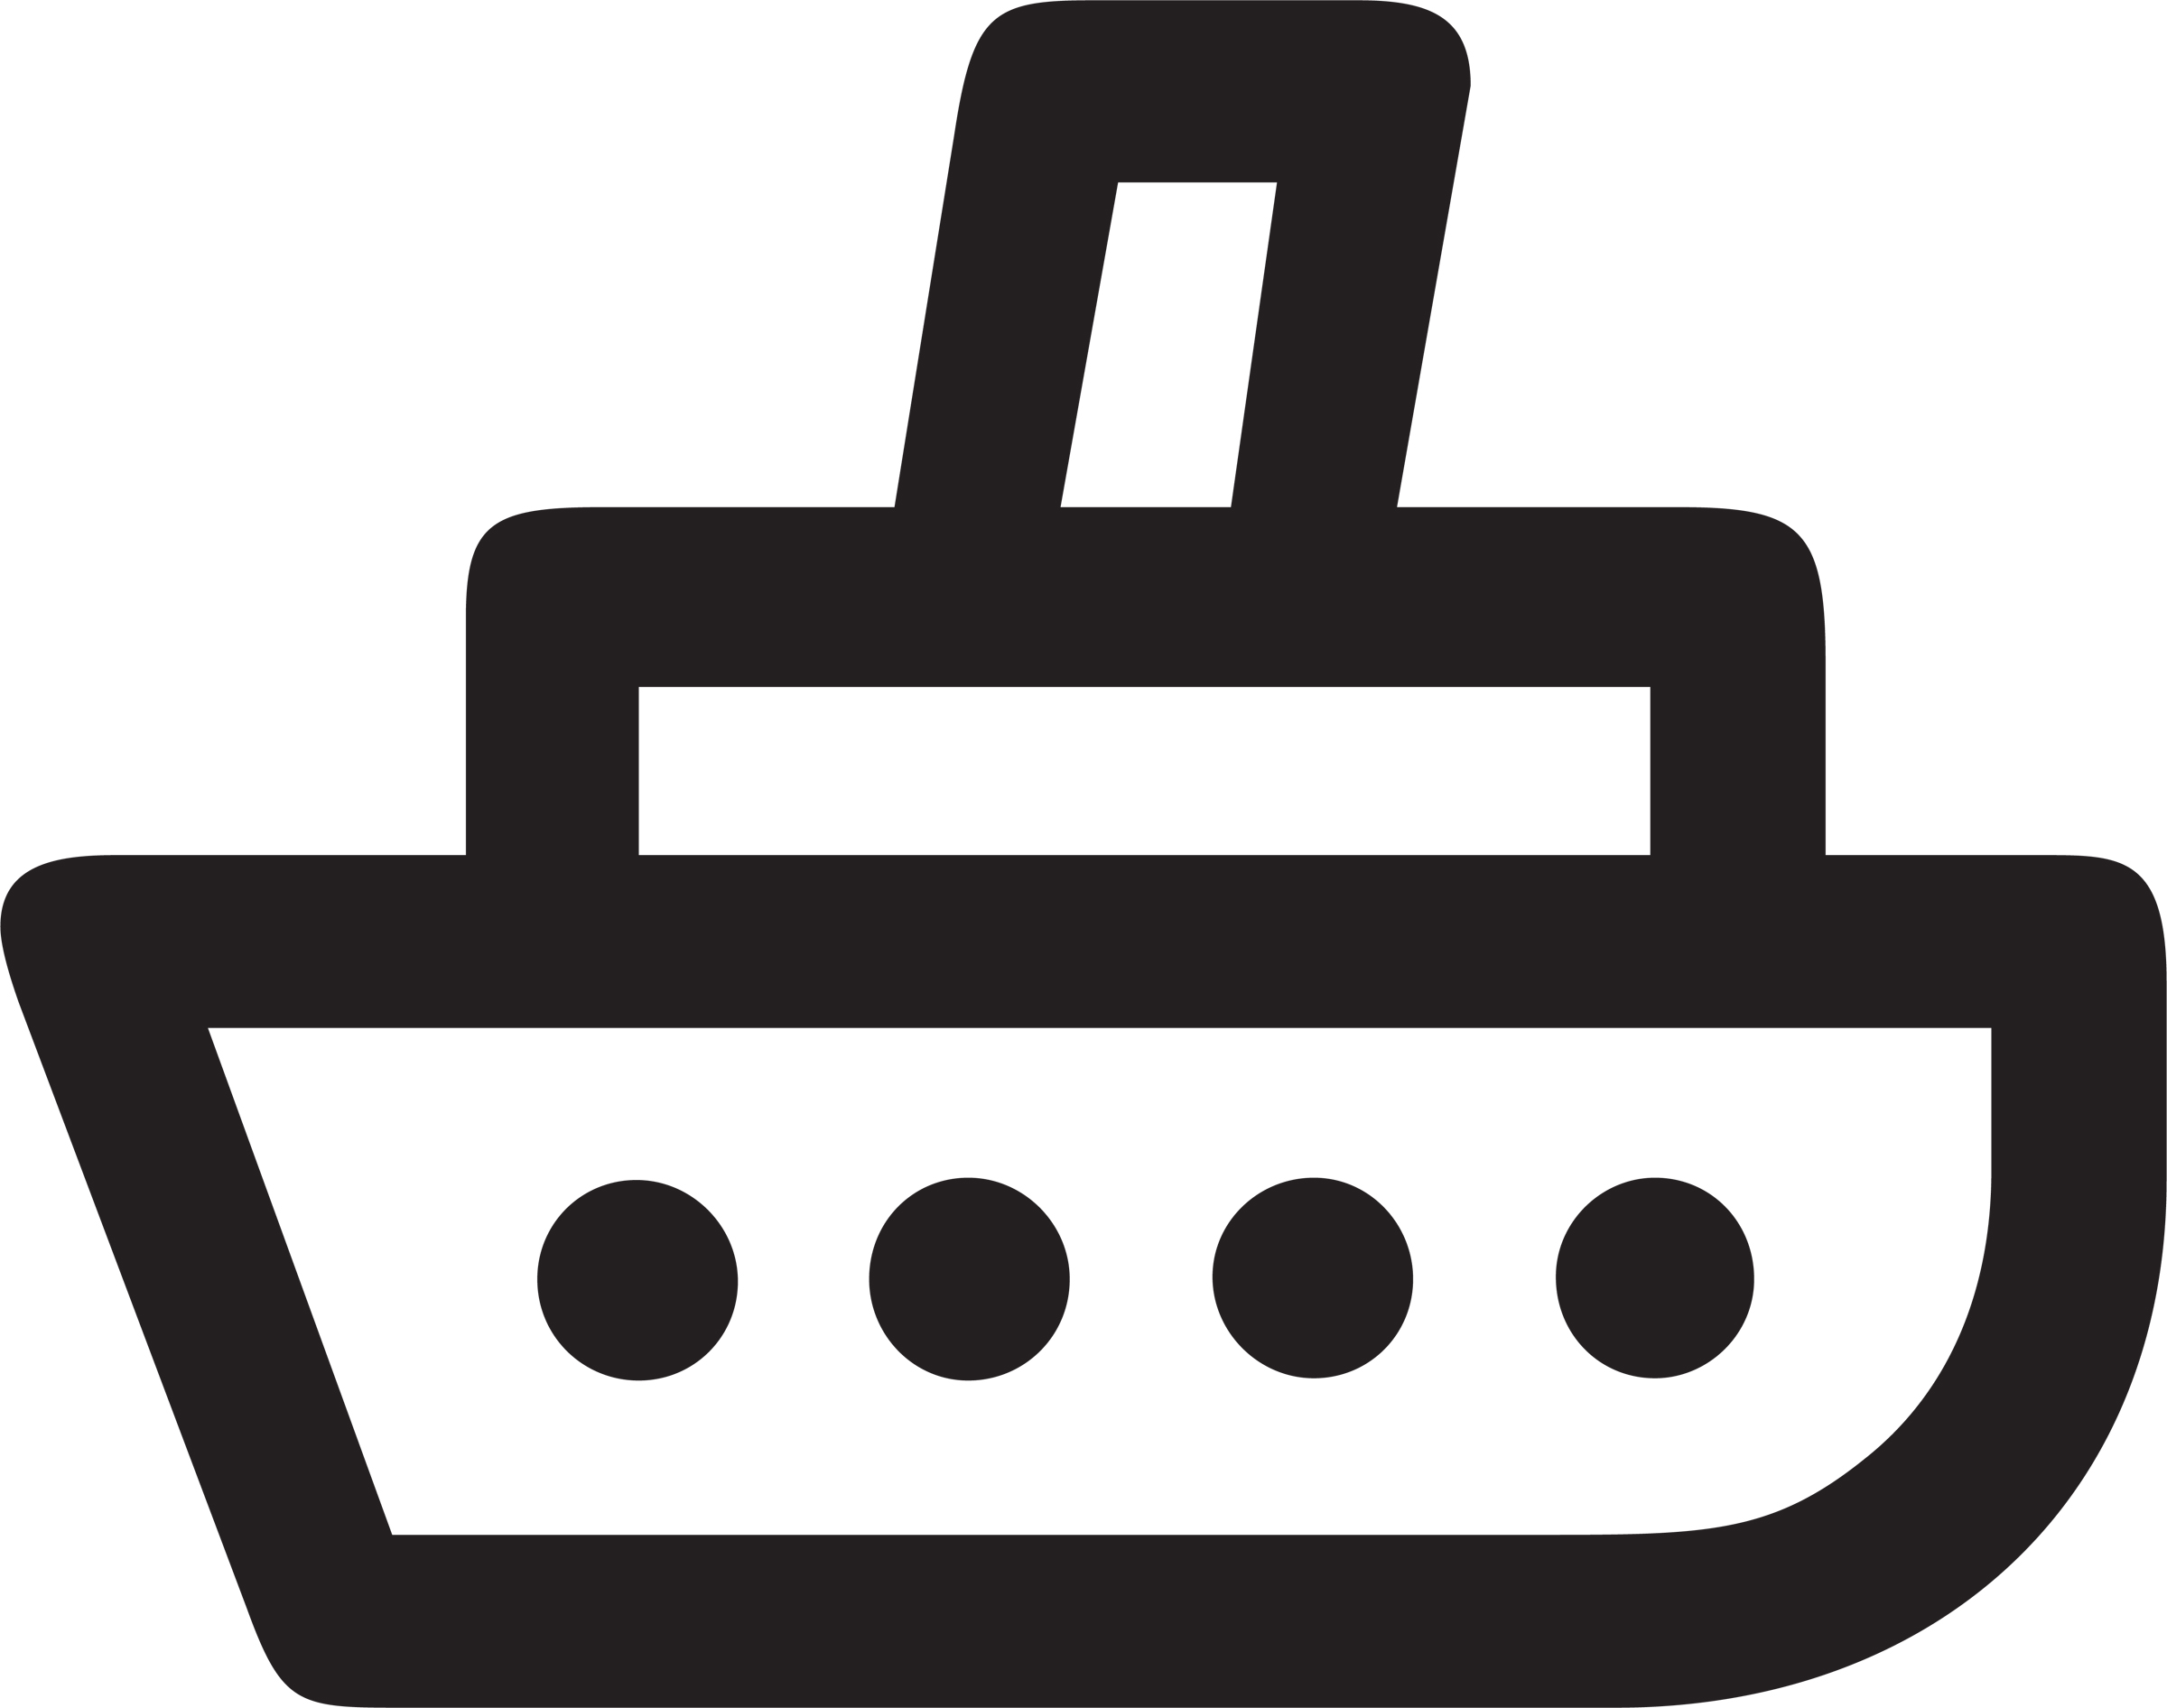 Tugboat Clipart   Clipart Panda   Free Clipart Images